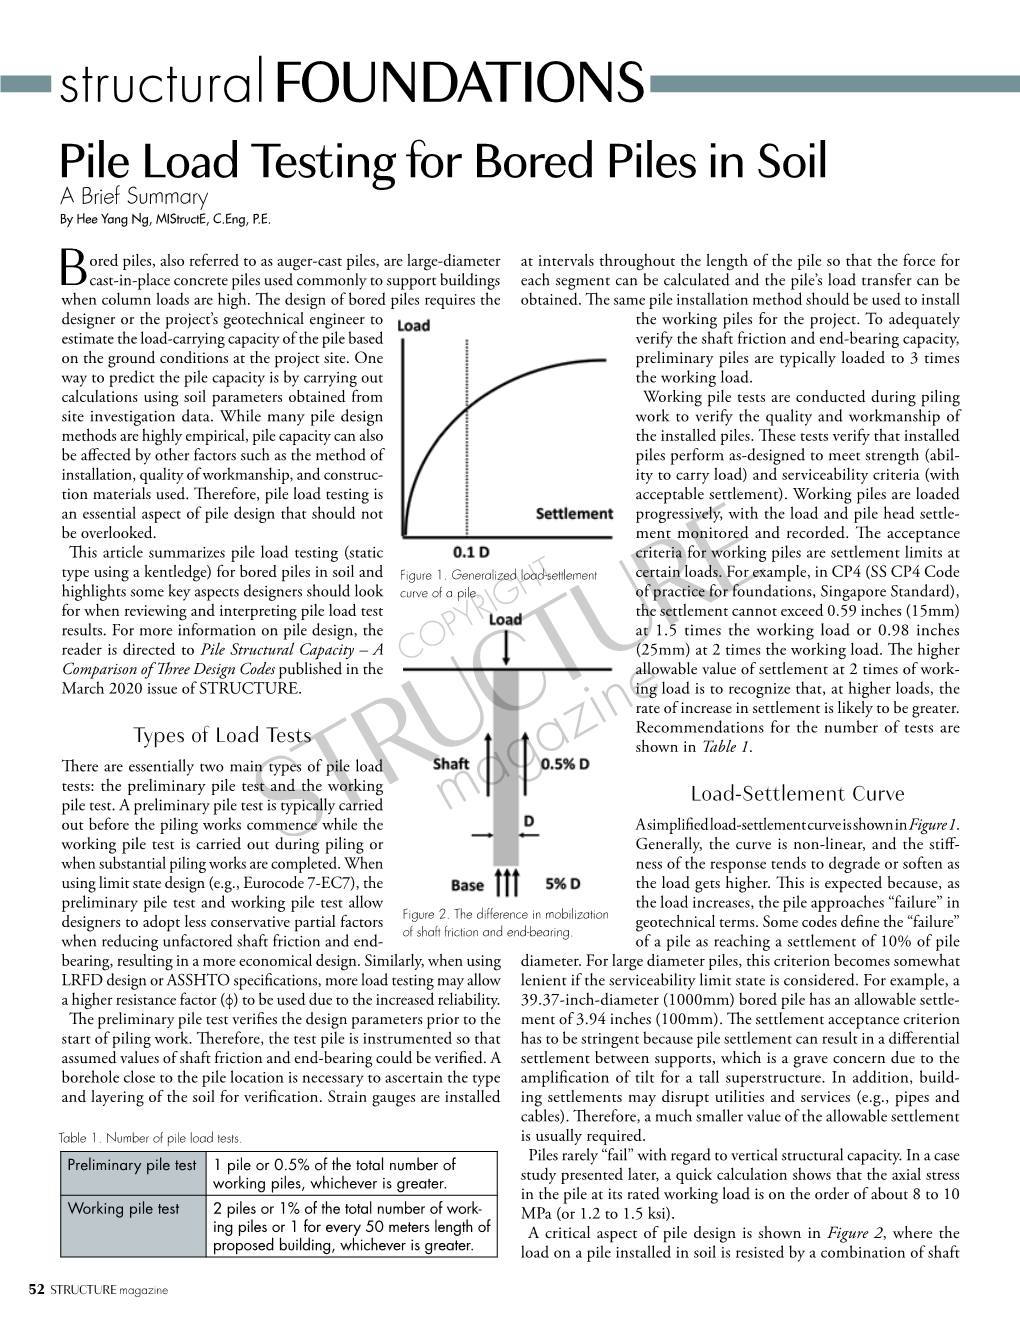 Structural FOUNDATIONS Pile Load Testing for Bored Piles in Soil a Brief Summary by Hee Yang Ng, Mistructe, C.Eng, P.E